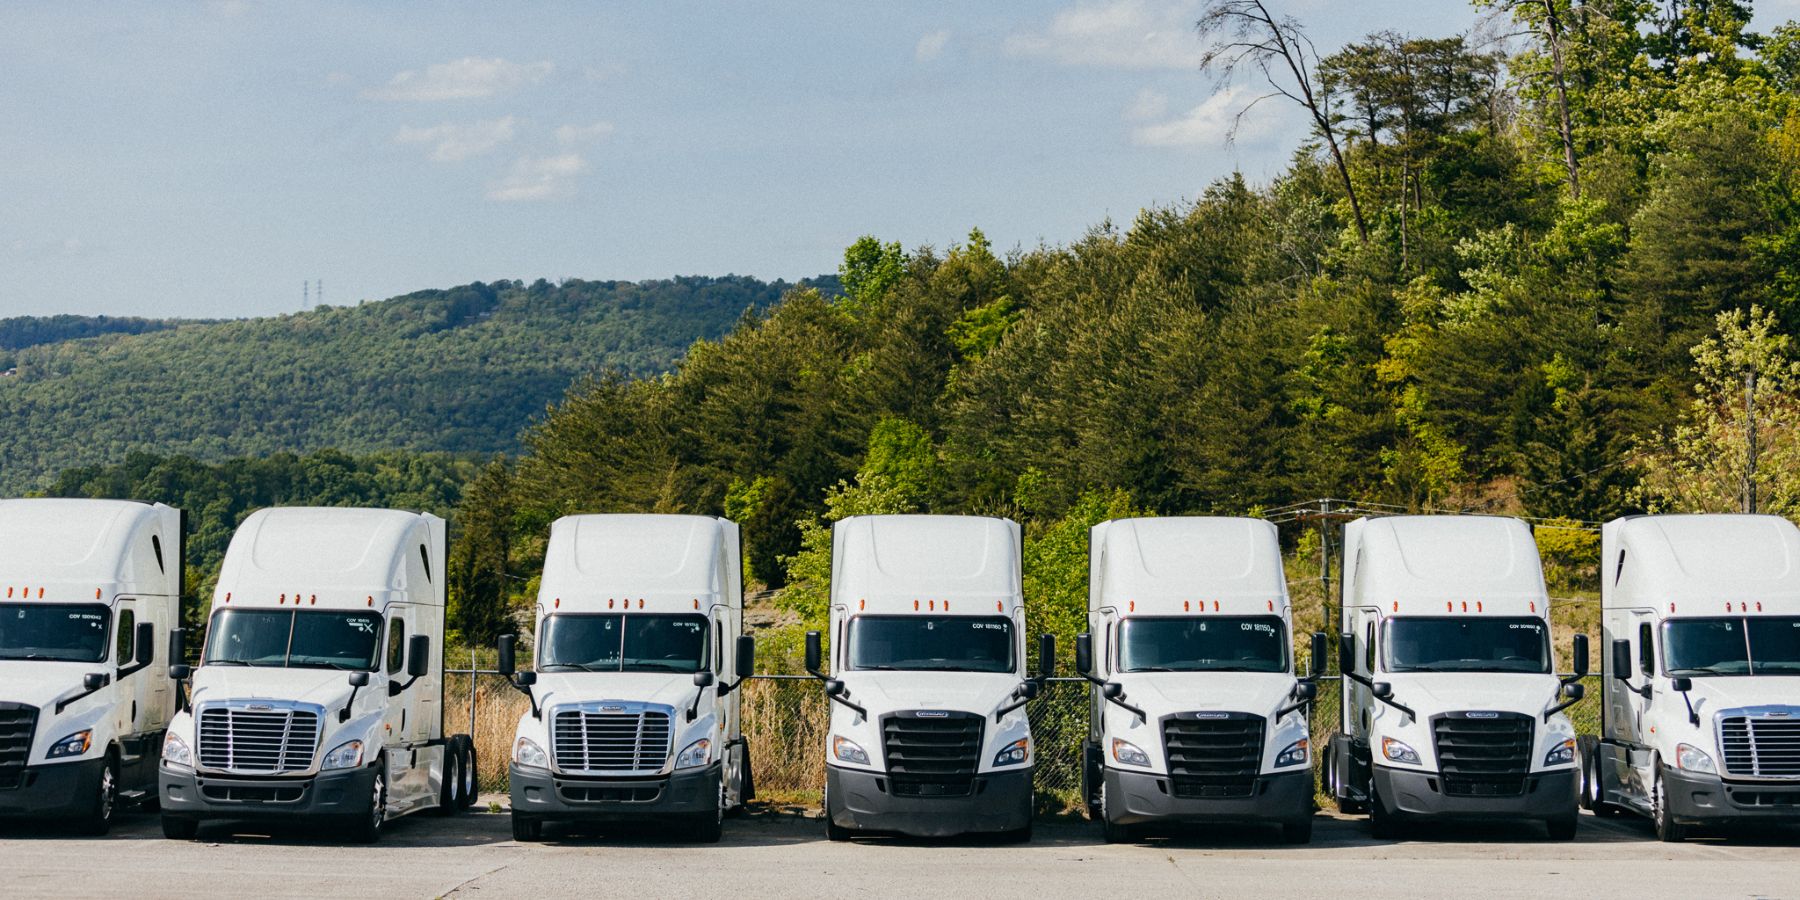 Fleet of modern 3PL delivery trucks ready to take on LTL deliveries